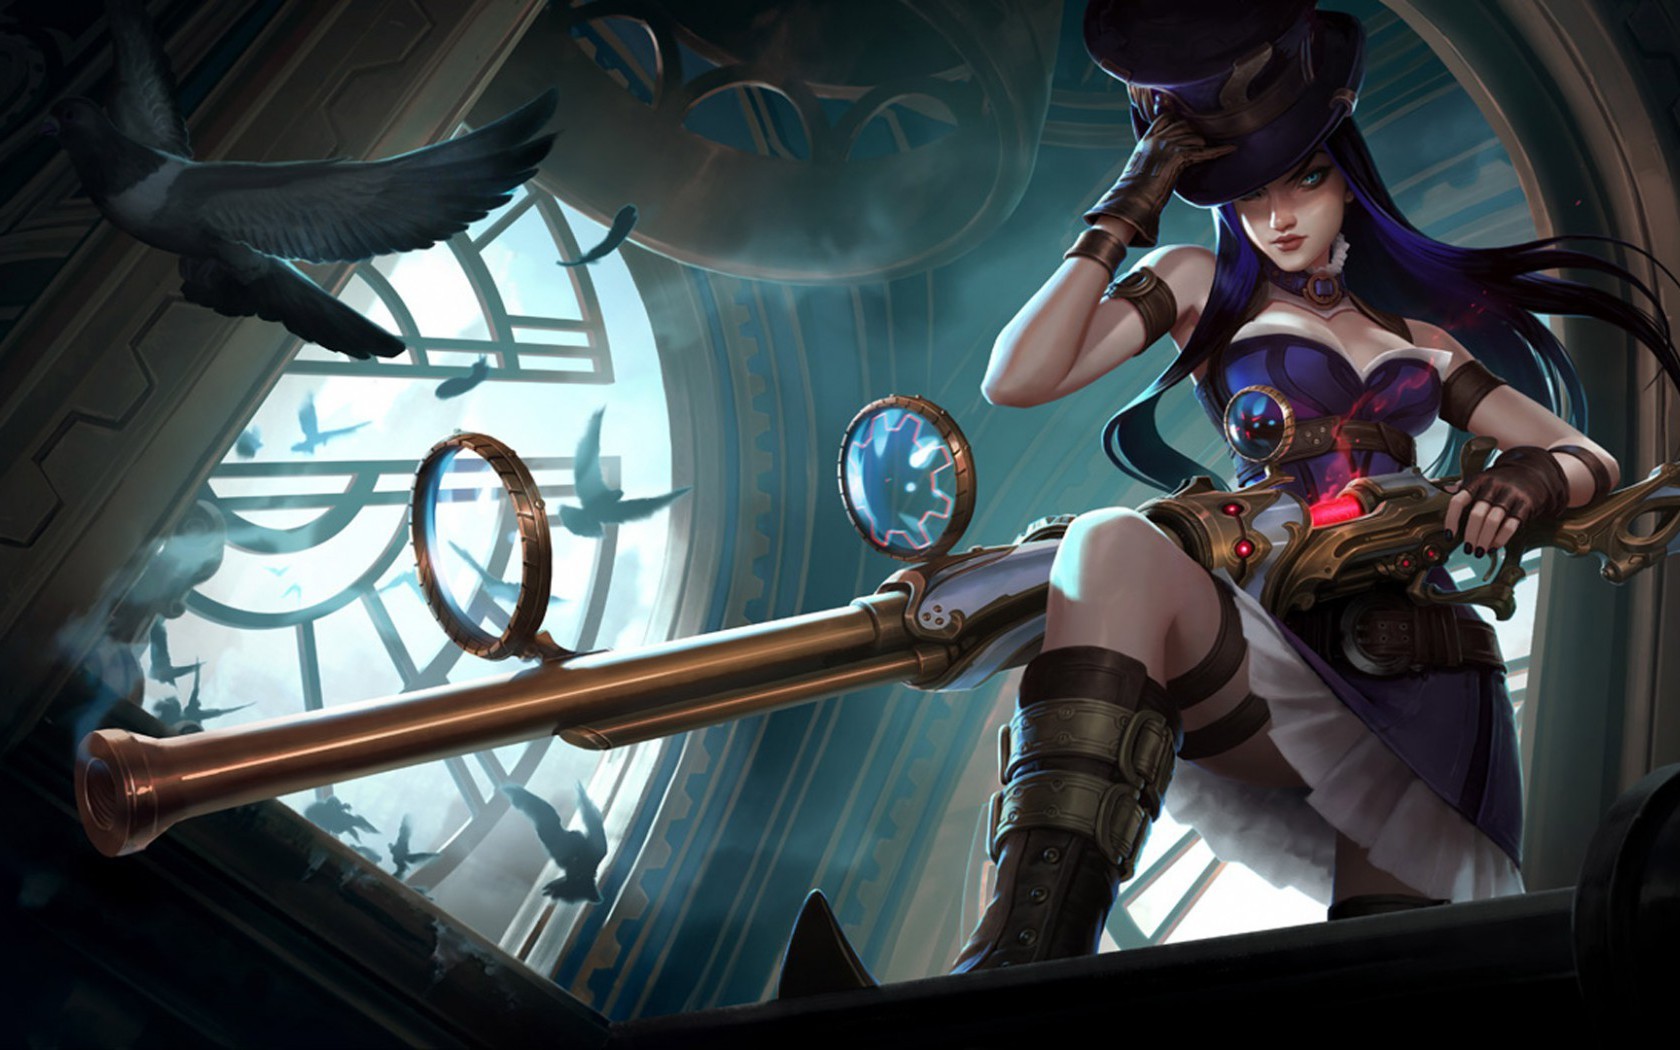 General 1680x1050 anime League of Legends anime girls fantasy weapon Caitlyn (League of Legends) video game art video game girls rifles weapon girls with guns hat women with hats long hair kneeling birds PC gaming top hat